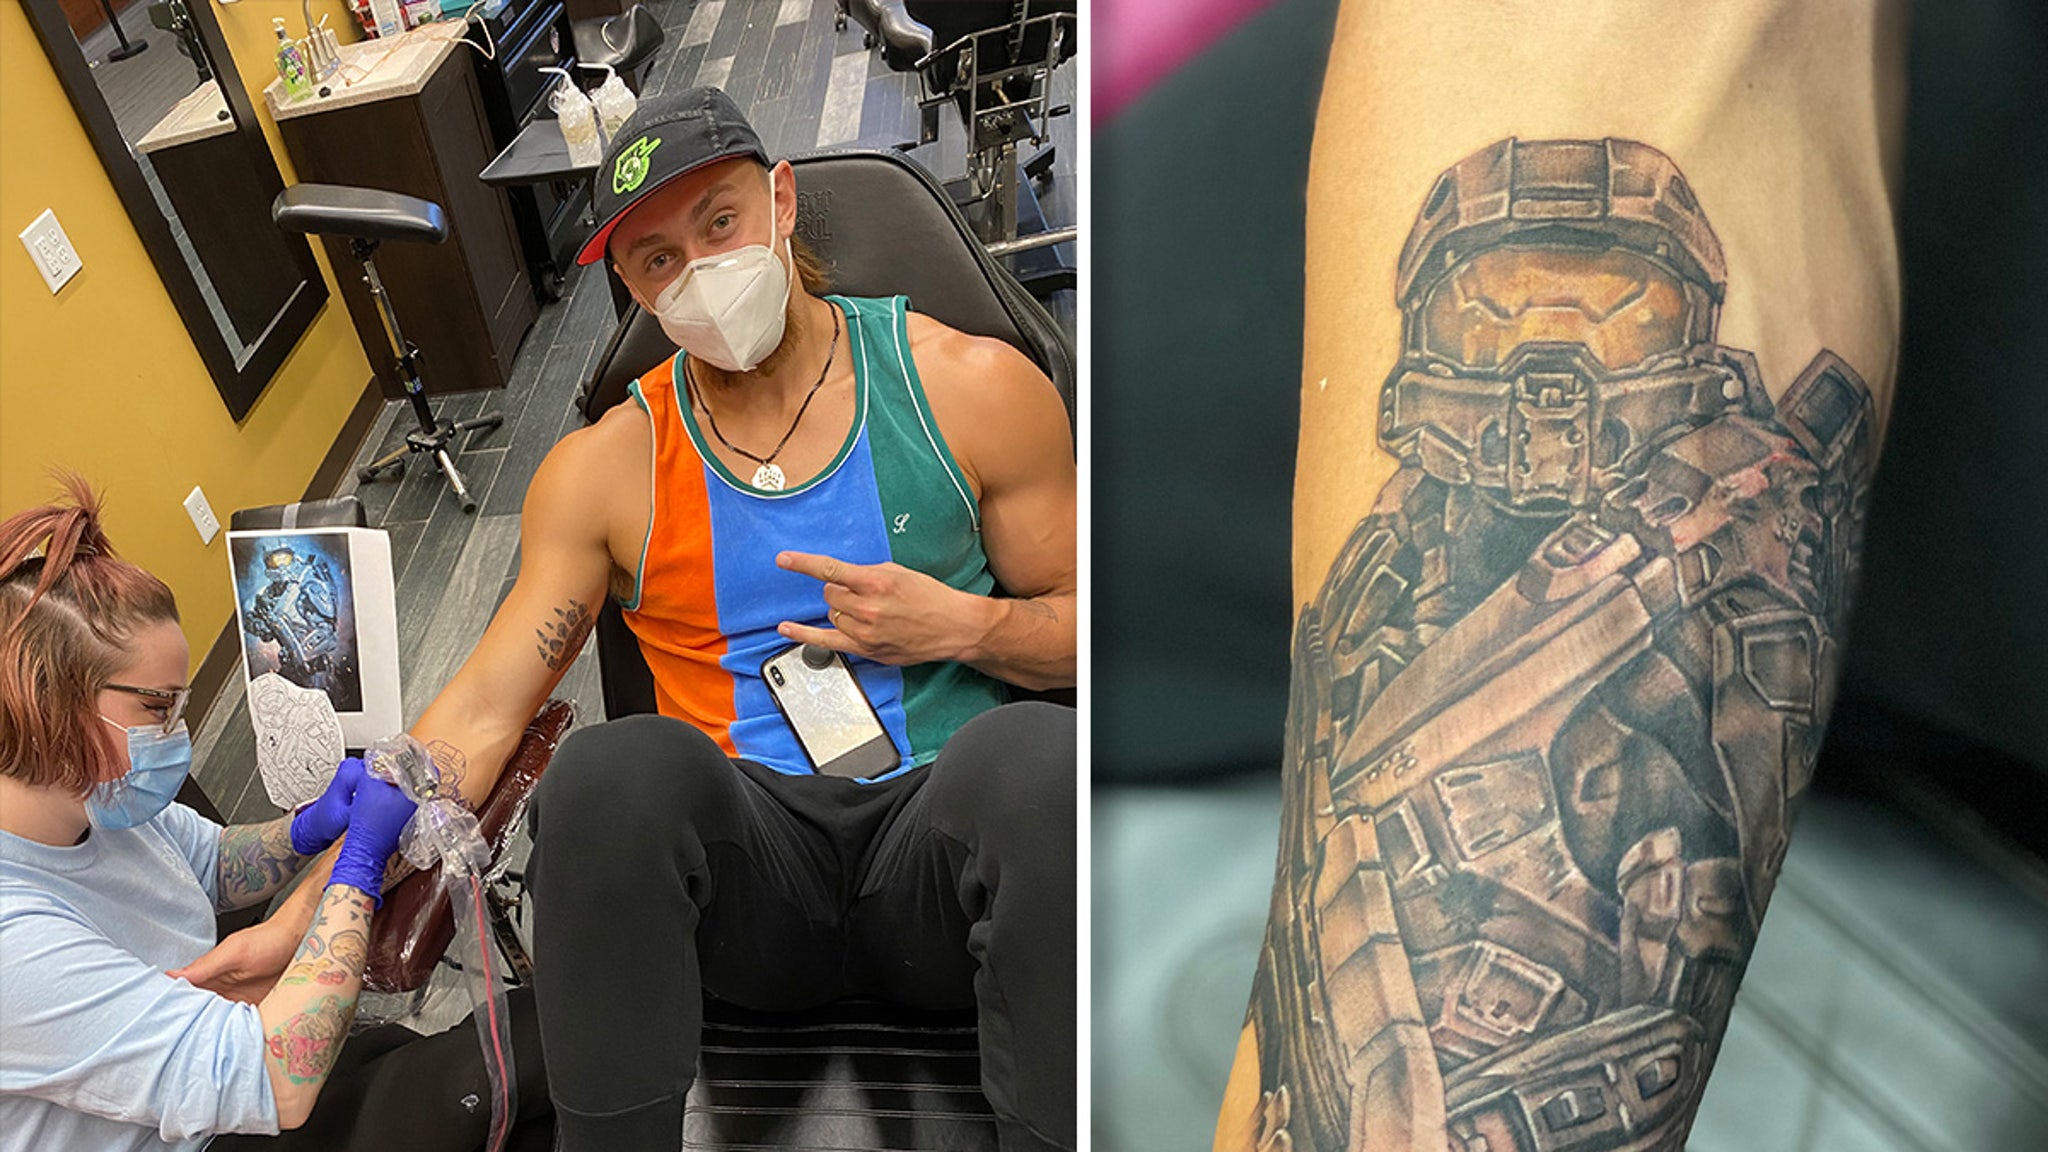 NFL's George Kittle Gets Massive Master Chief Tat, Halo Fan For Life!